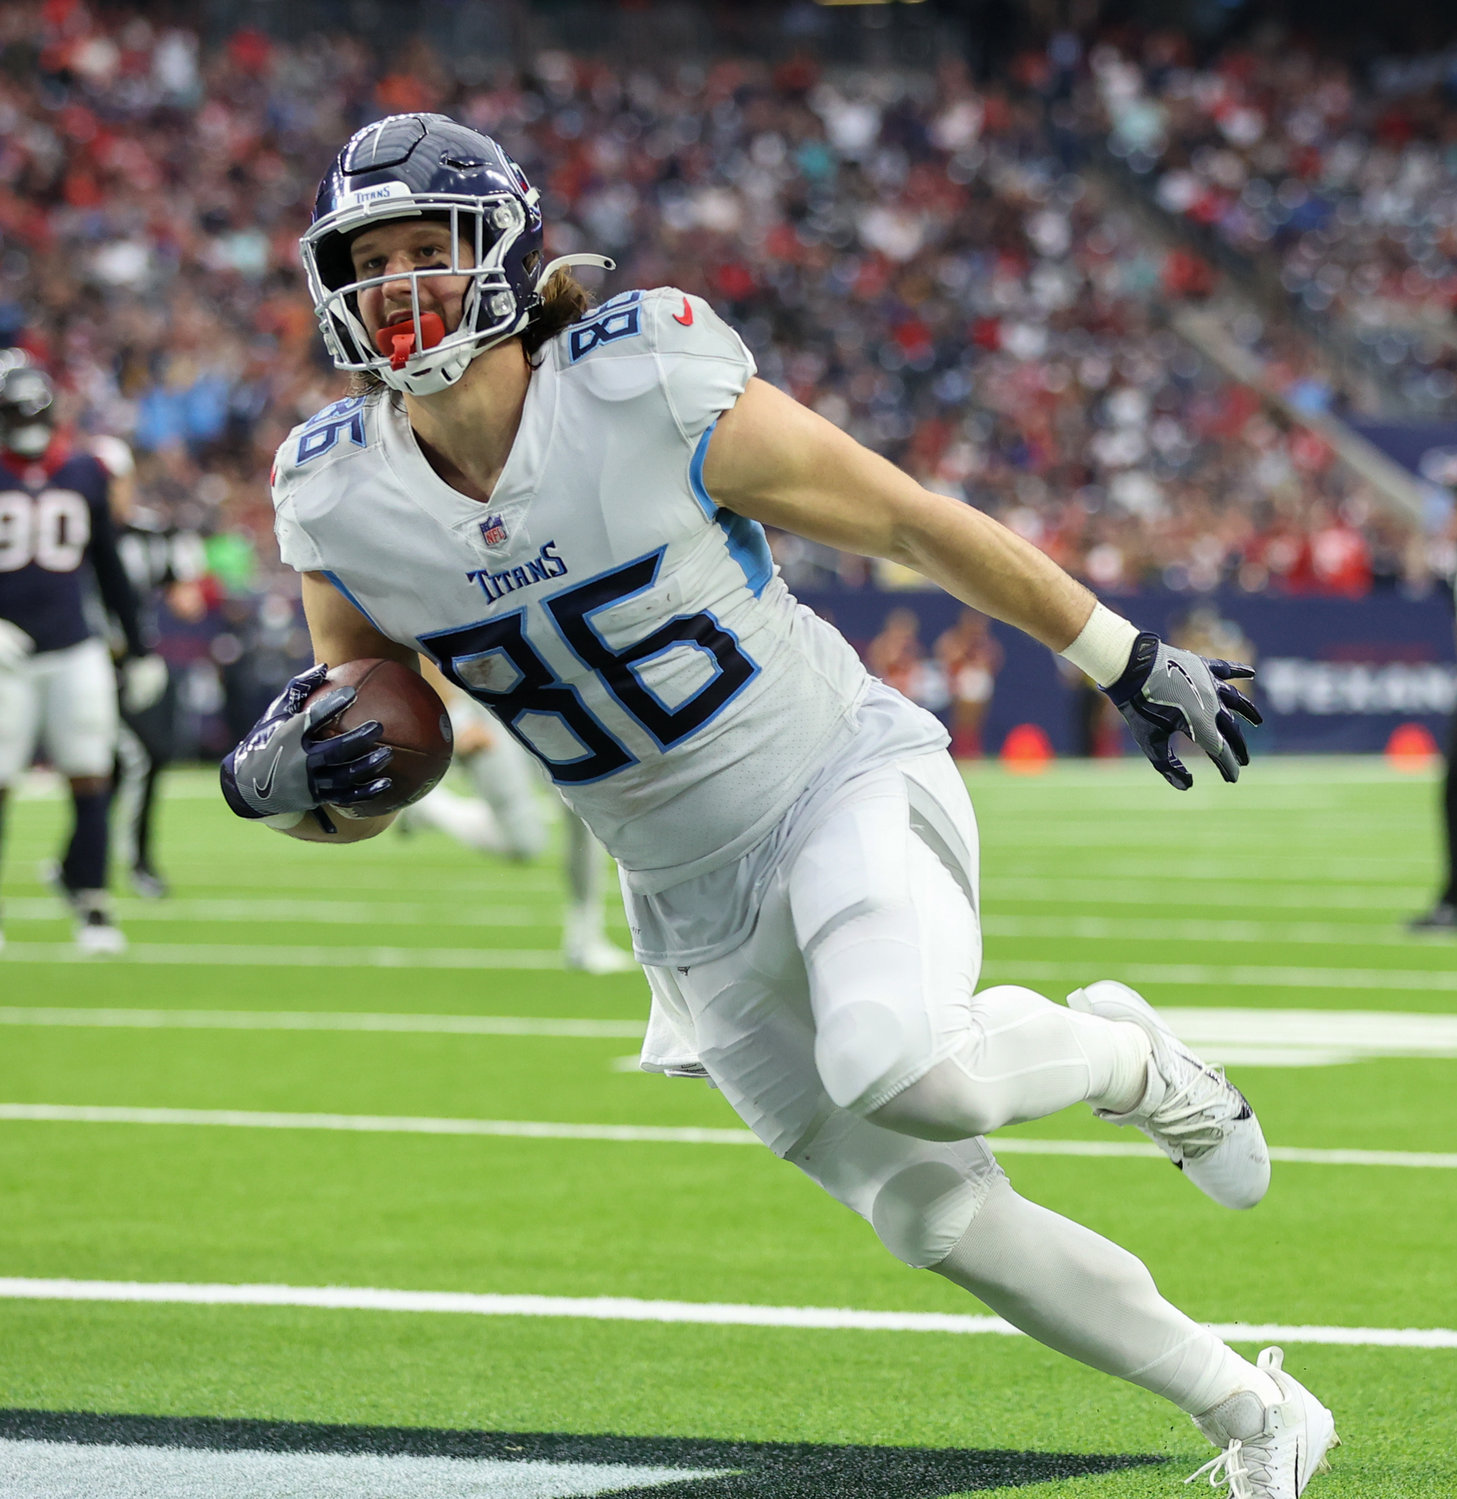 Tennessee Titans tight end Anthony Firkser (86) scores on a 5-yard touchdown catch in the second quarter of an NFL game between the Texans and the Titans on Jan. 9, 2022 in Houston, Texas. The Titans won, 28-25.